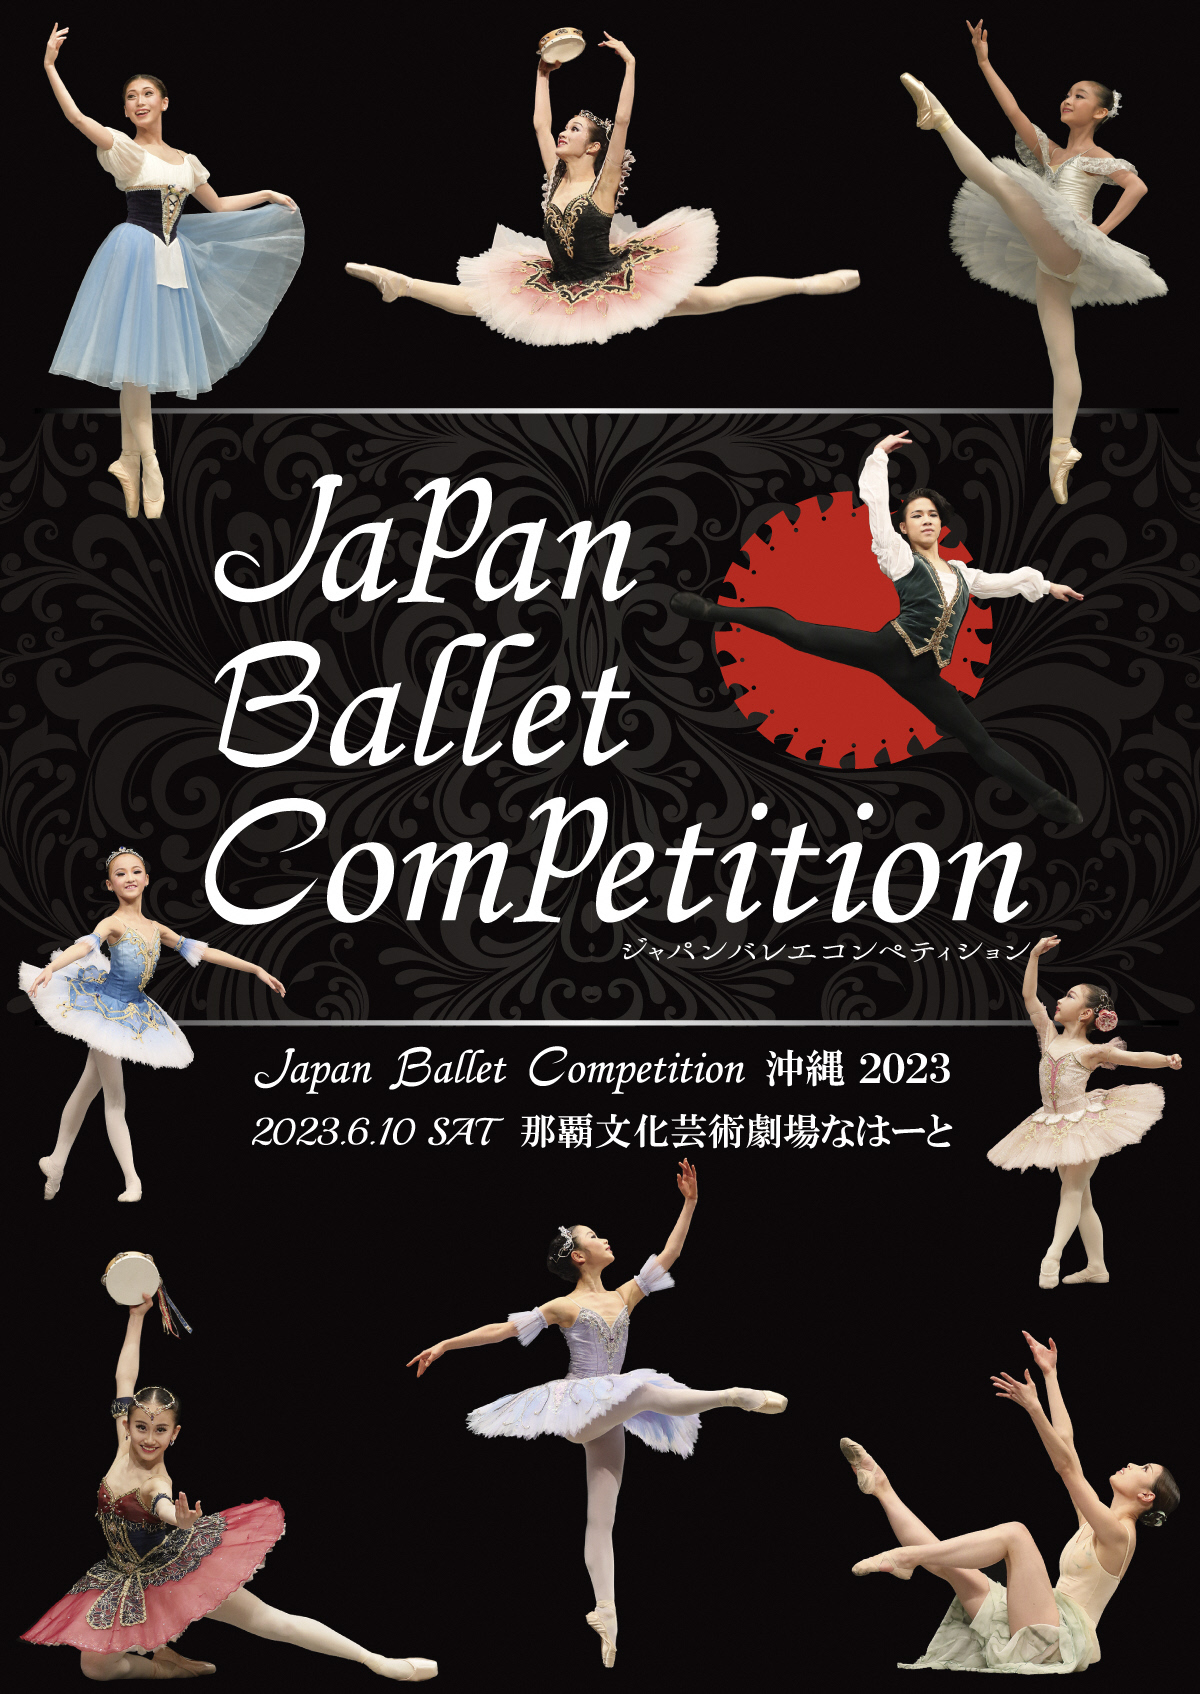 Japan Ballet Competition 沖縄 2023